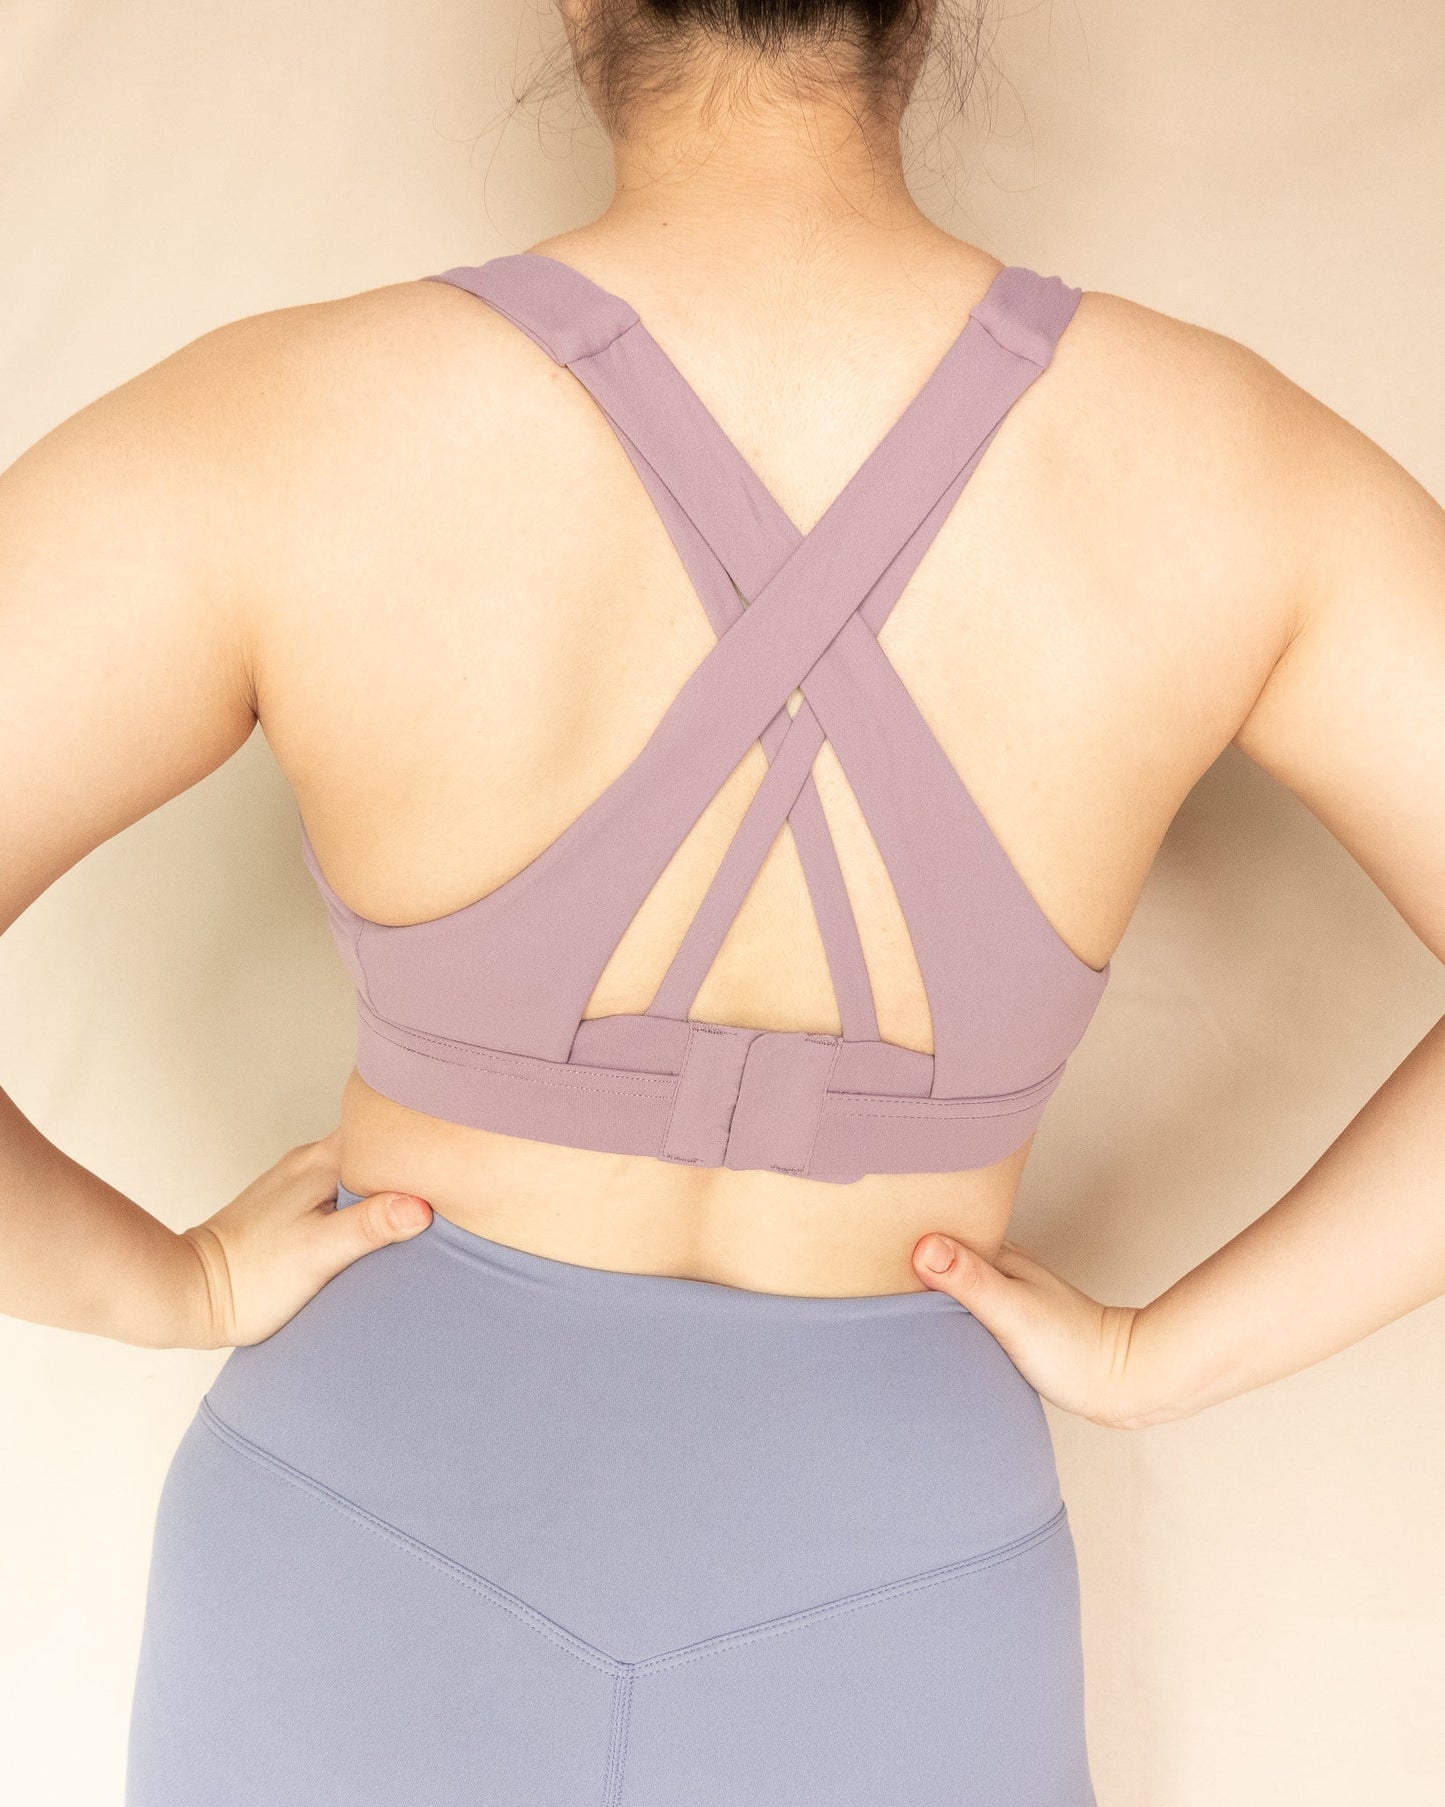 Easy bra in Magnolia - New Day Activewear